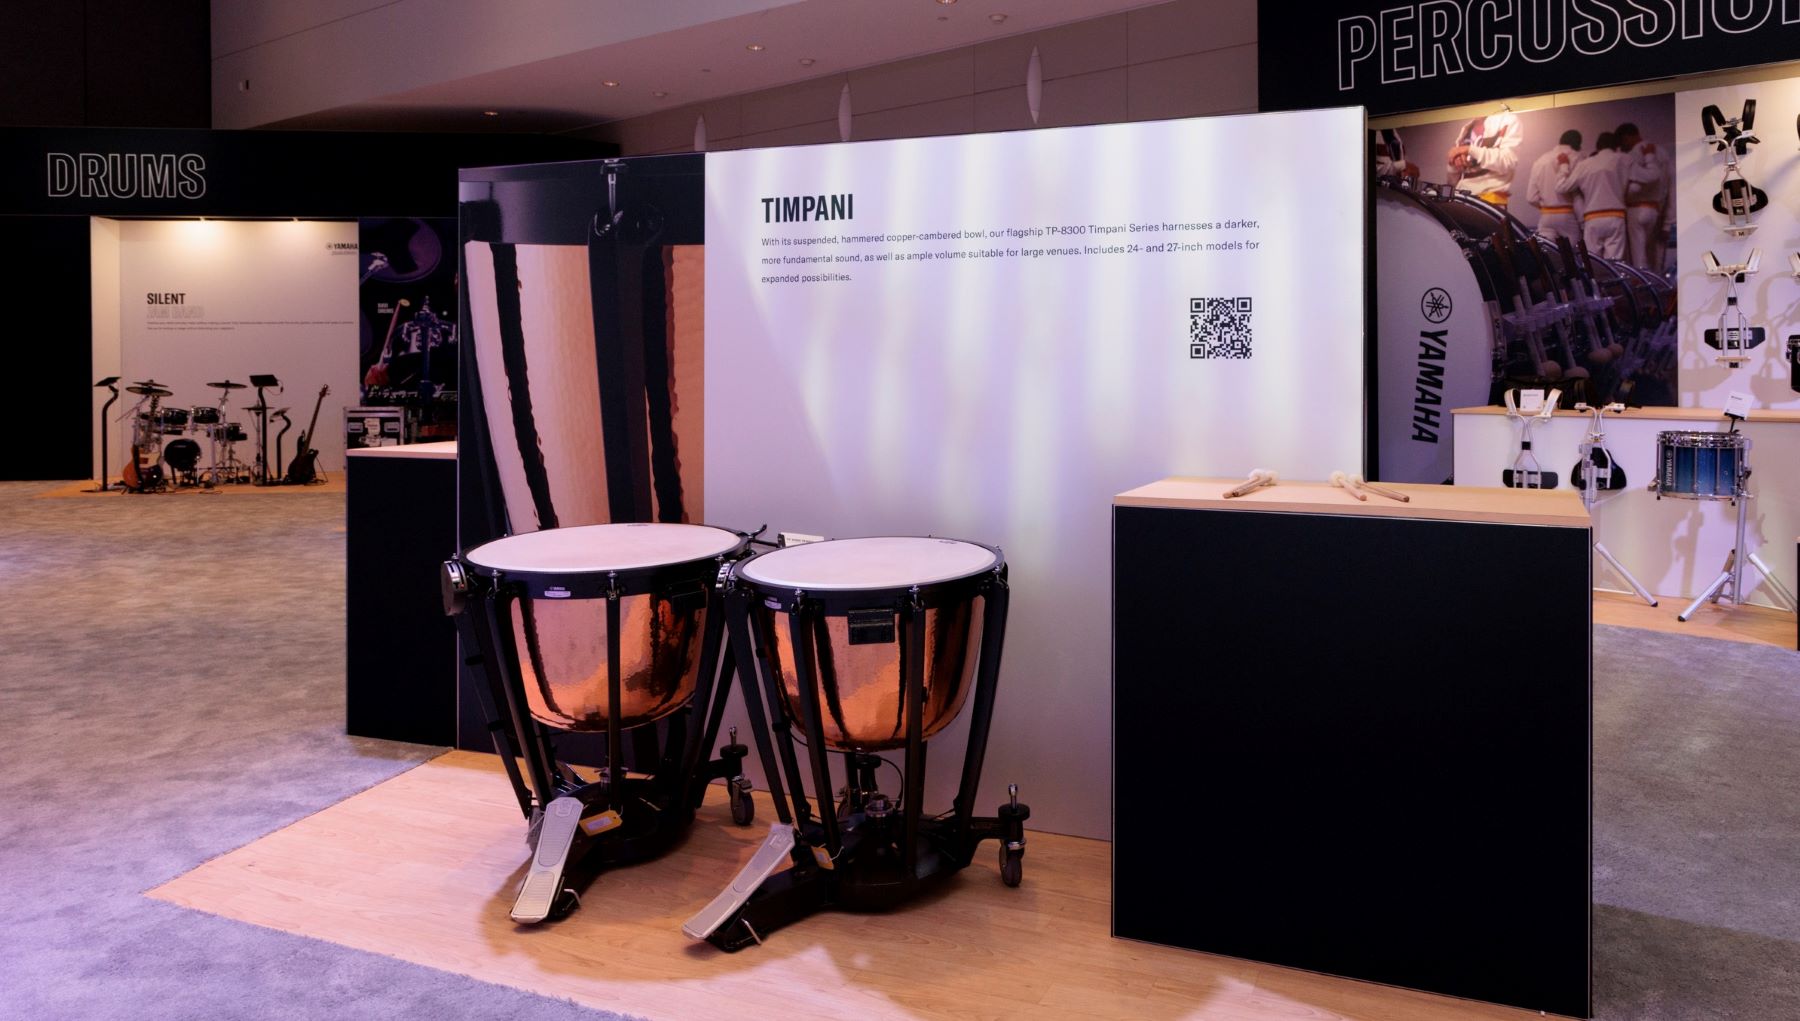 Display with two timpani drums in front of signage.